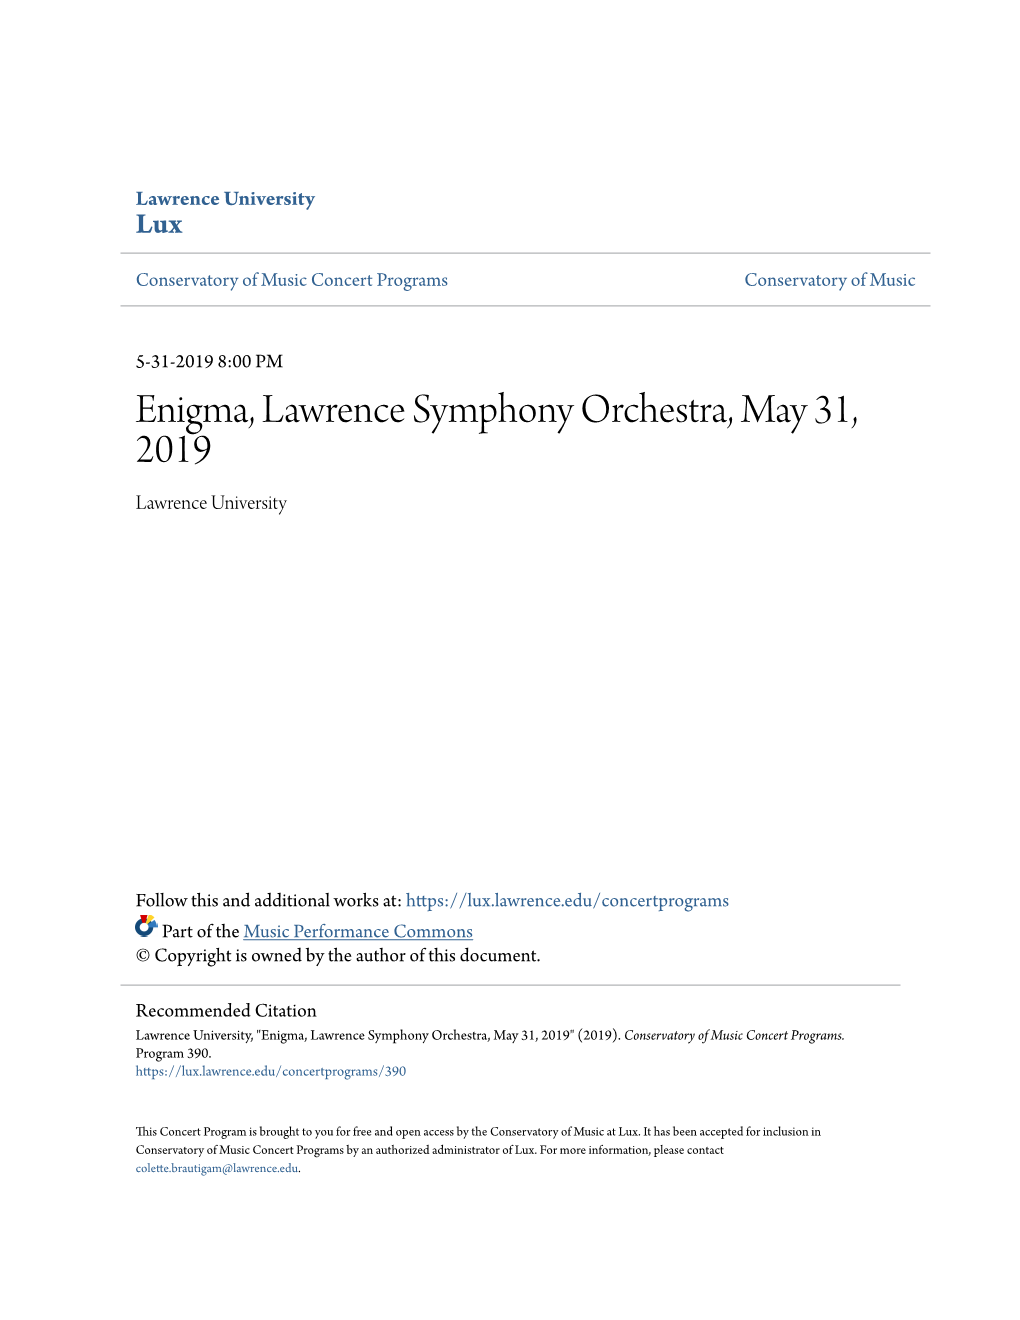 Enigma, Lawrence Symphony Orchestra, May 31, 2019 Lawrence University